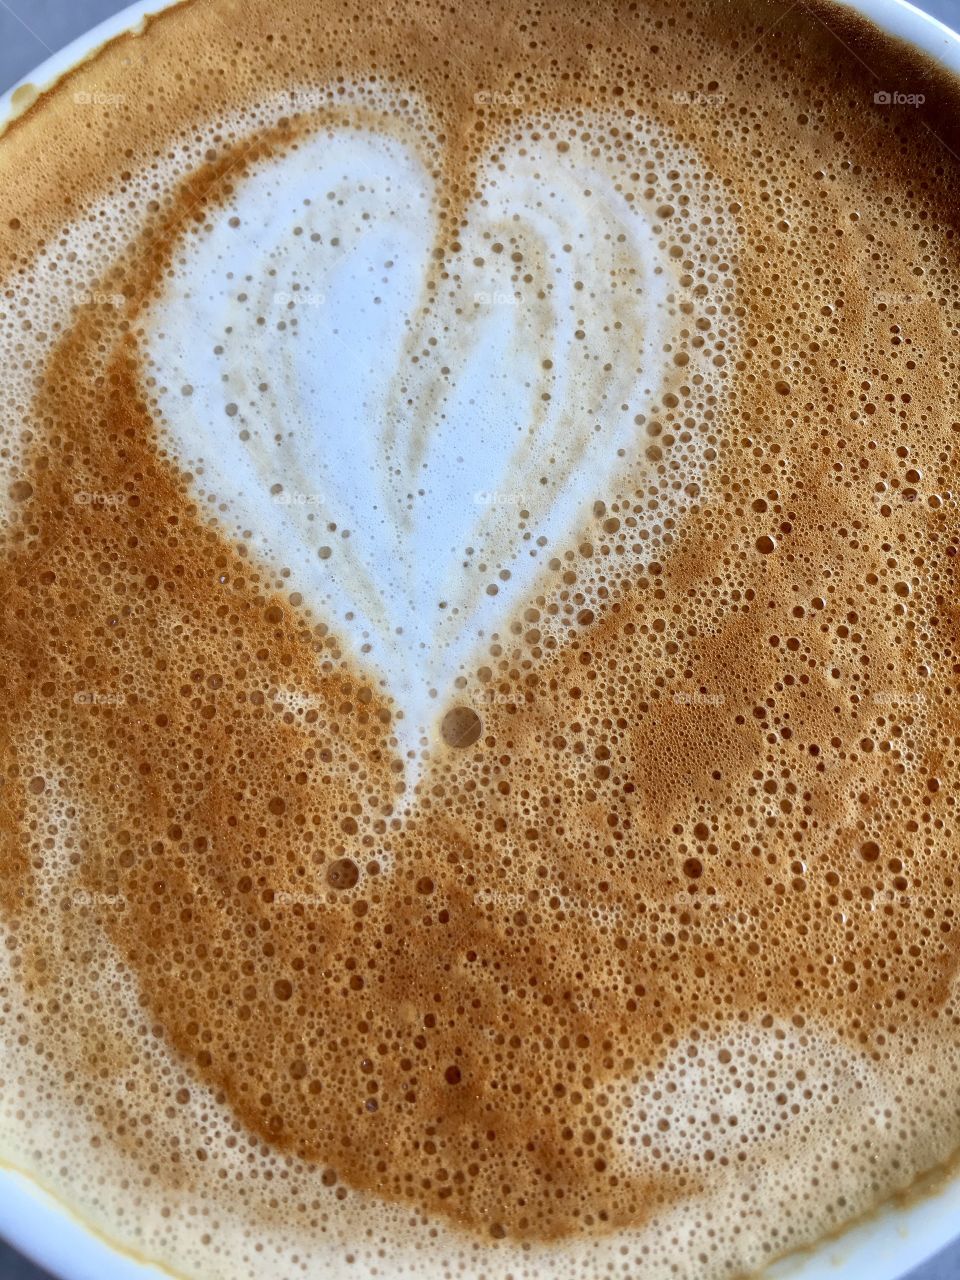 Valentine's Day coffee, heart shape in cream foam in Cafe latte, love, dating, relationships, romance